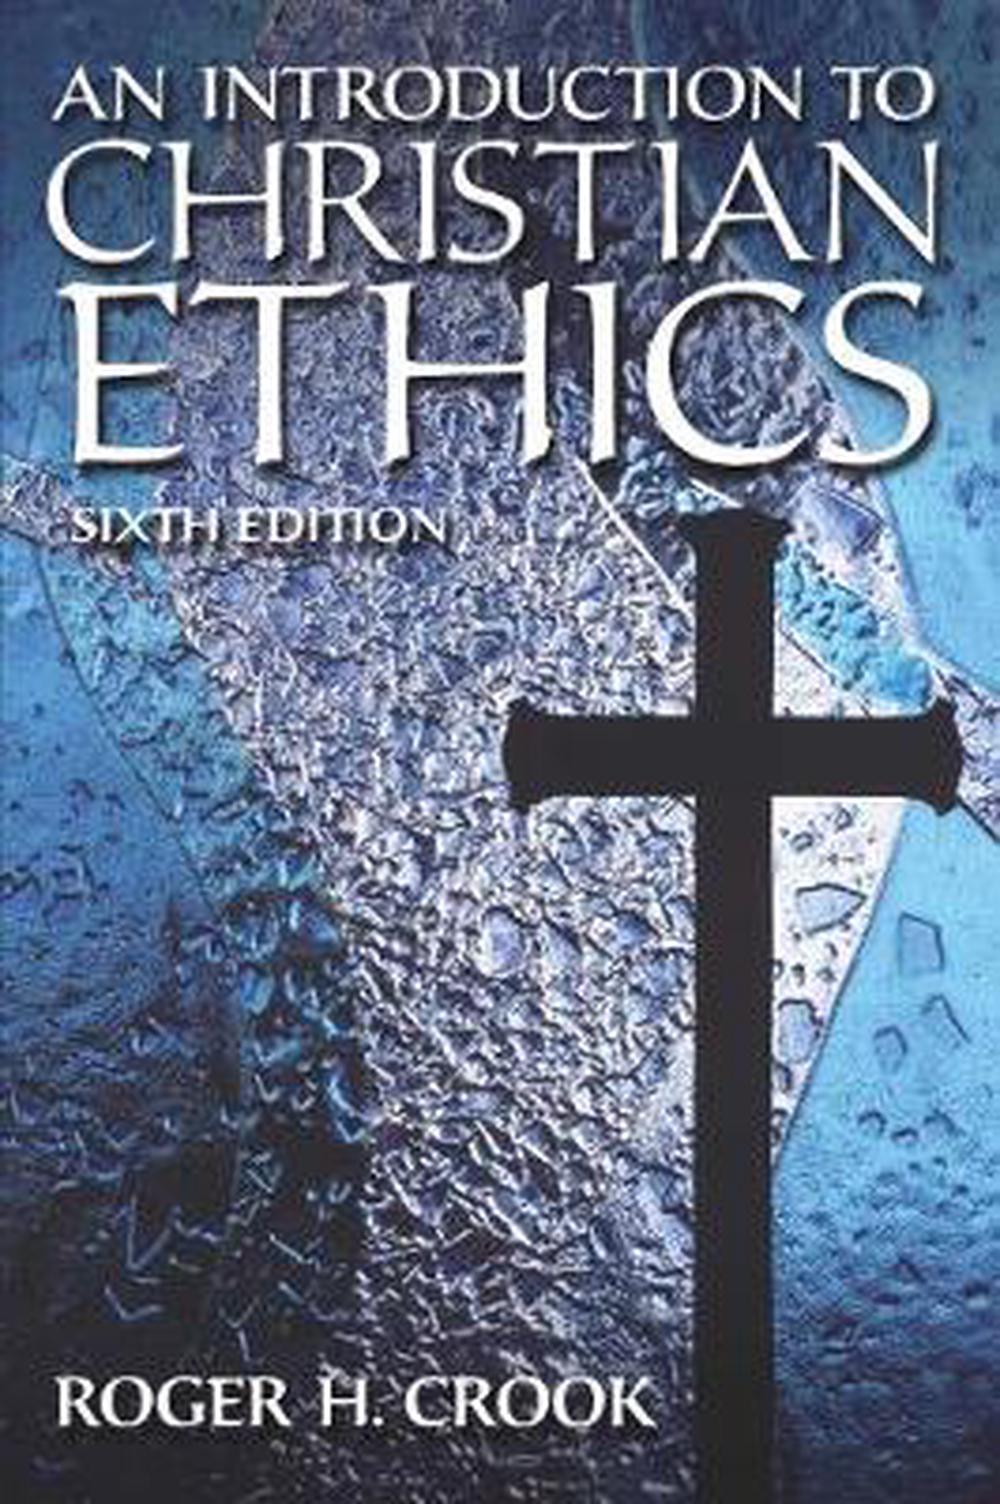 research topics on christian ethics